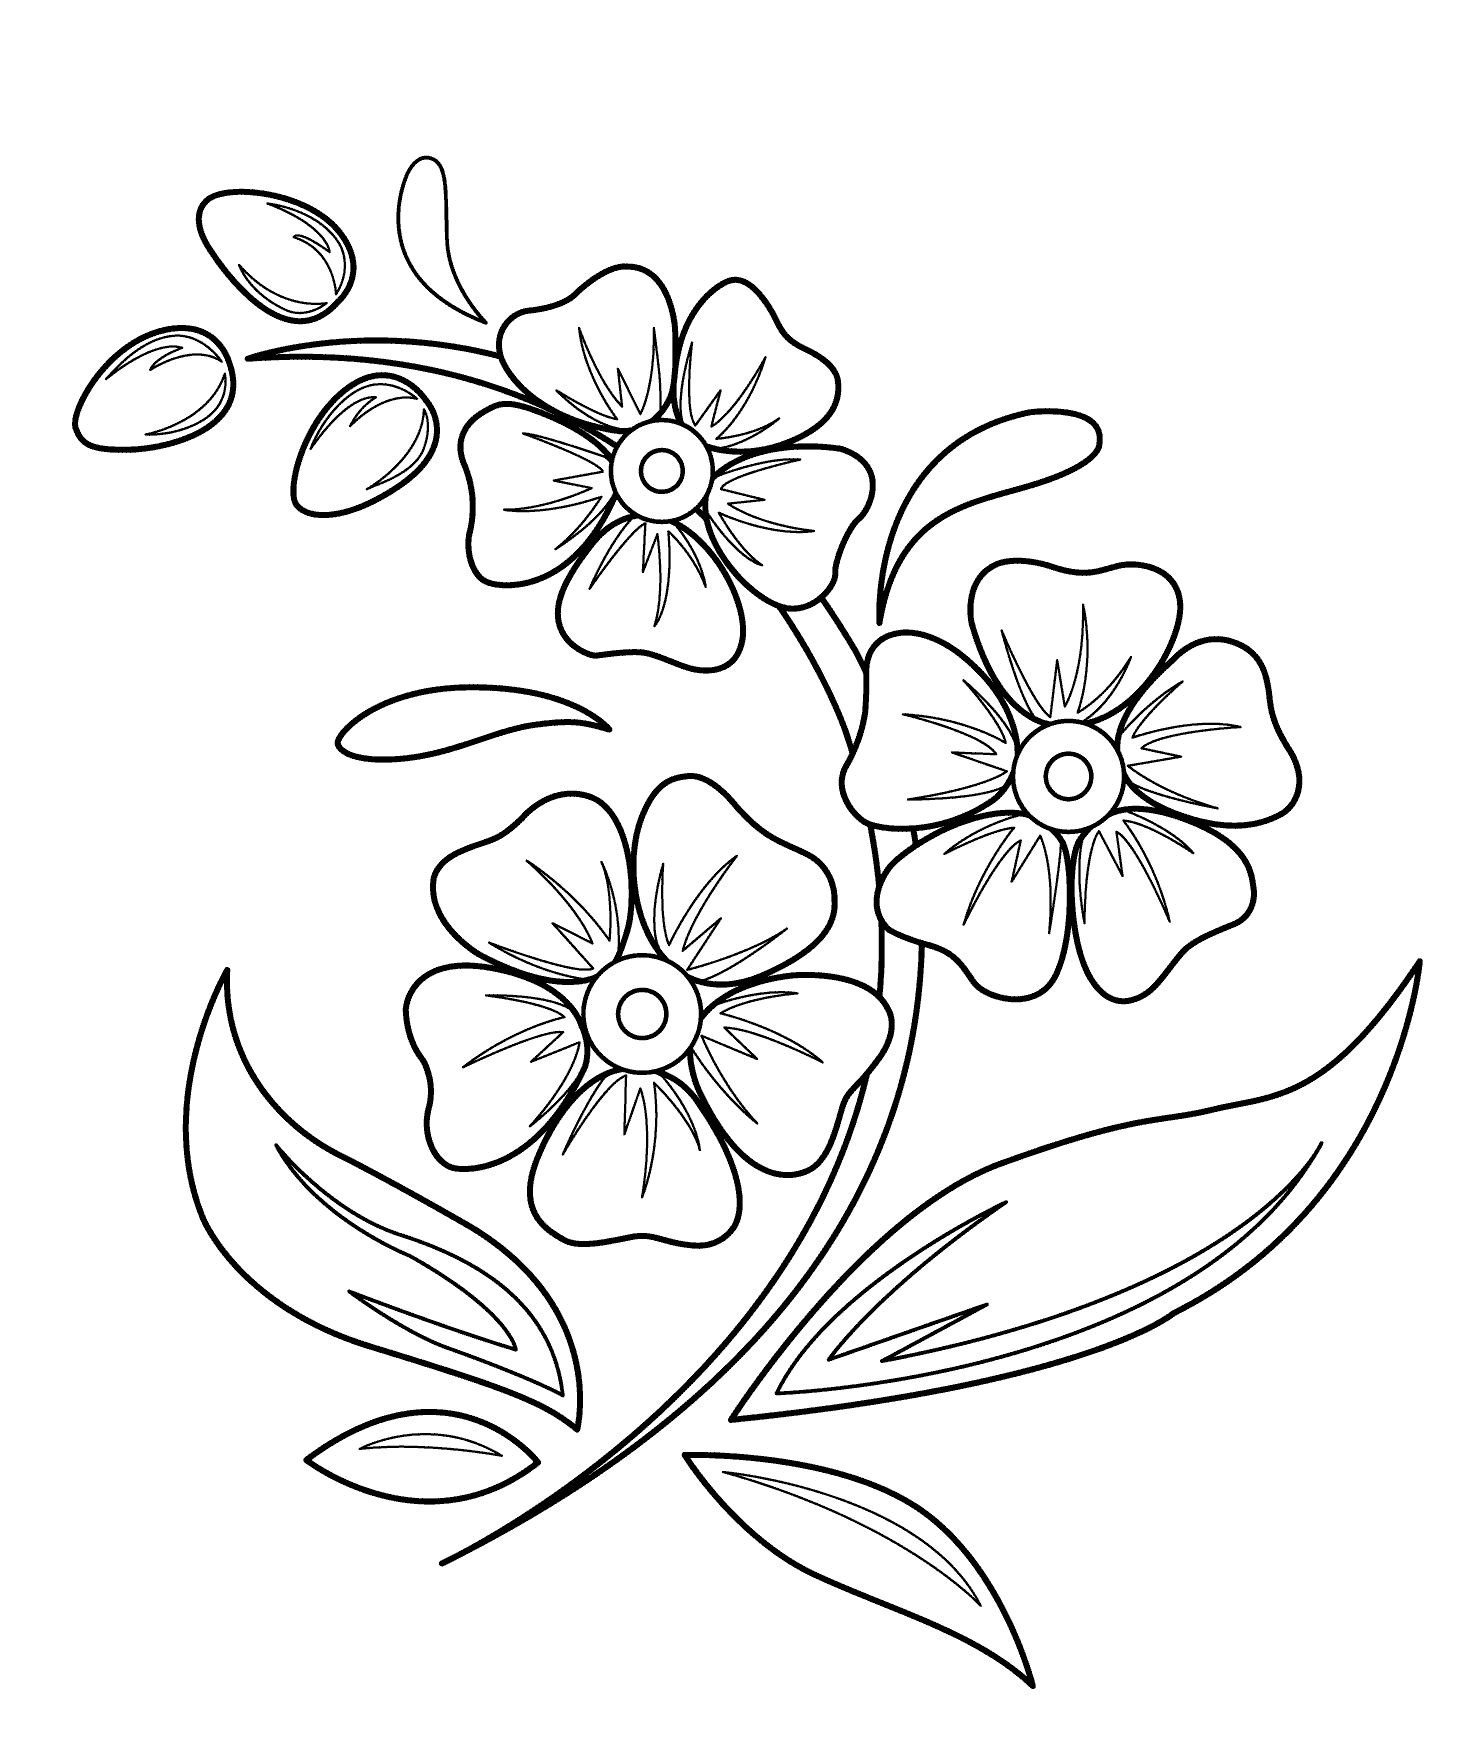 Flowers Drawing For Kids - Cliparts.co